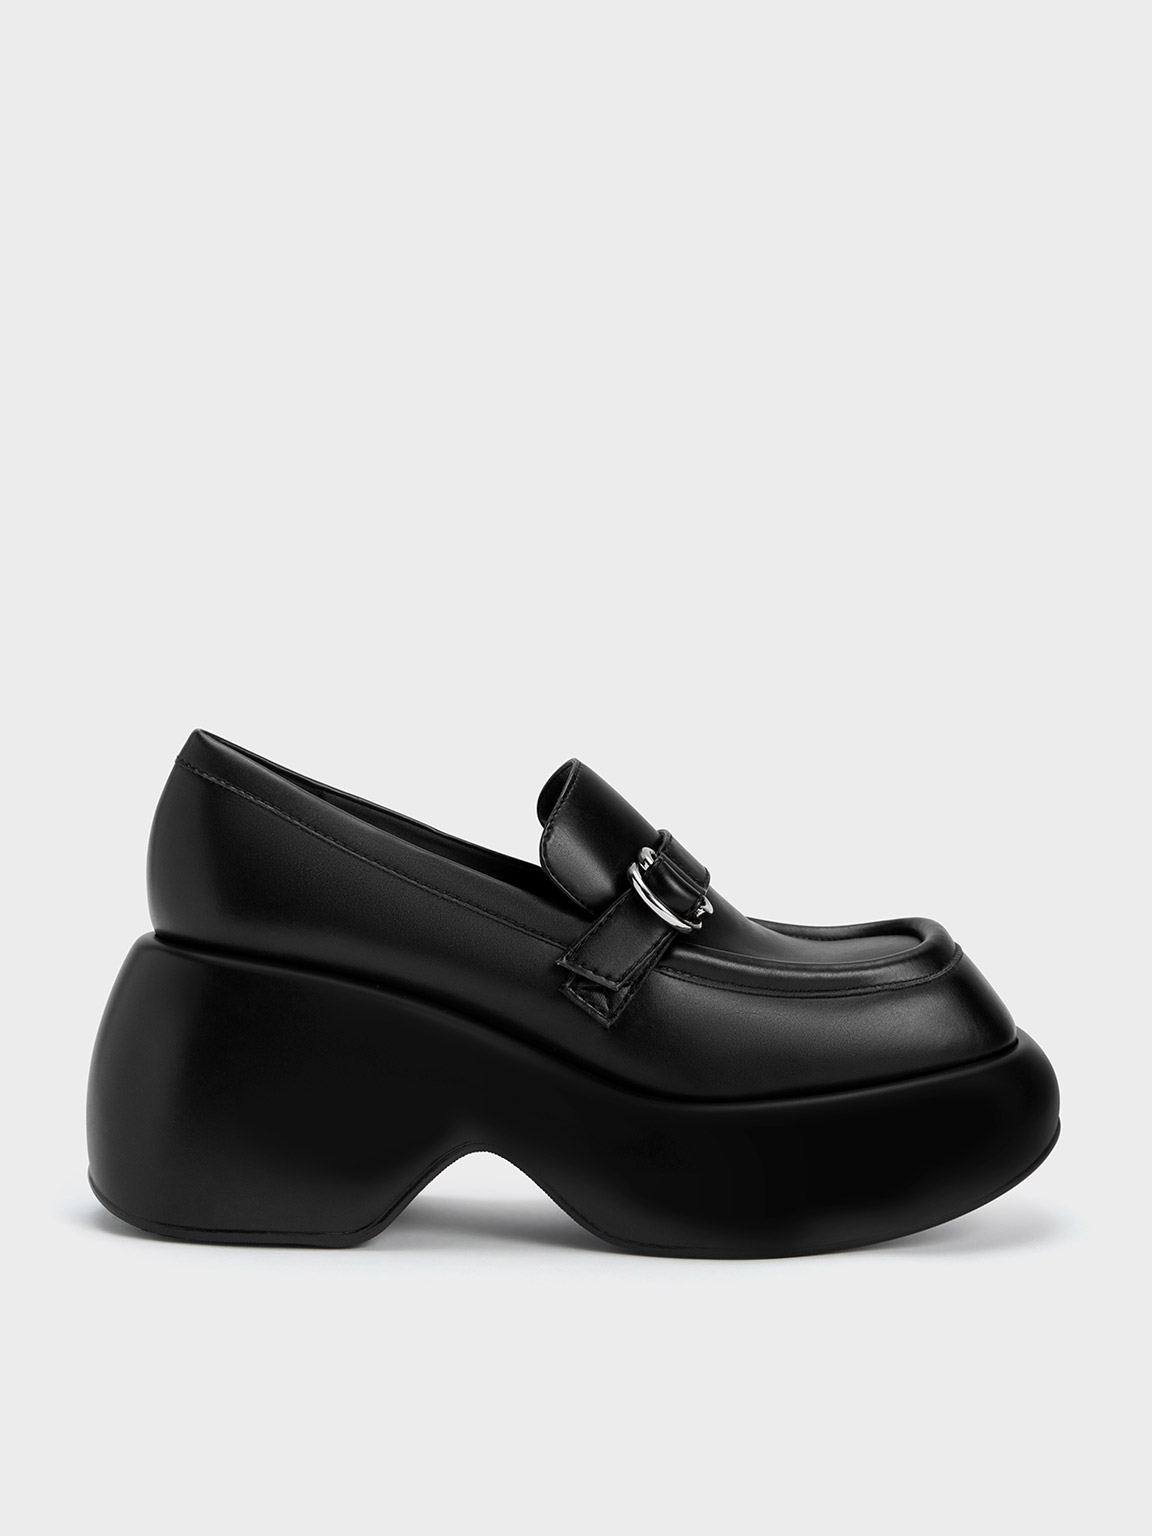 Charles & Keith Buckled Platform Penny Loafers In Black